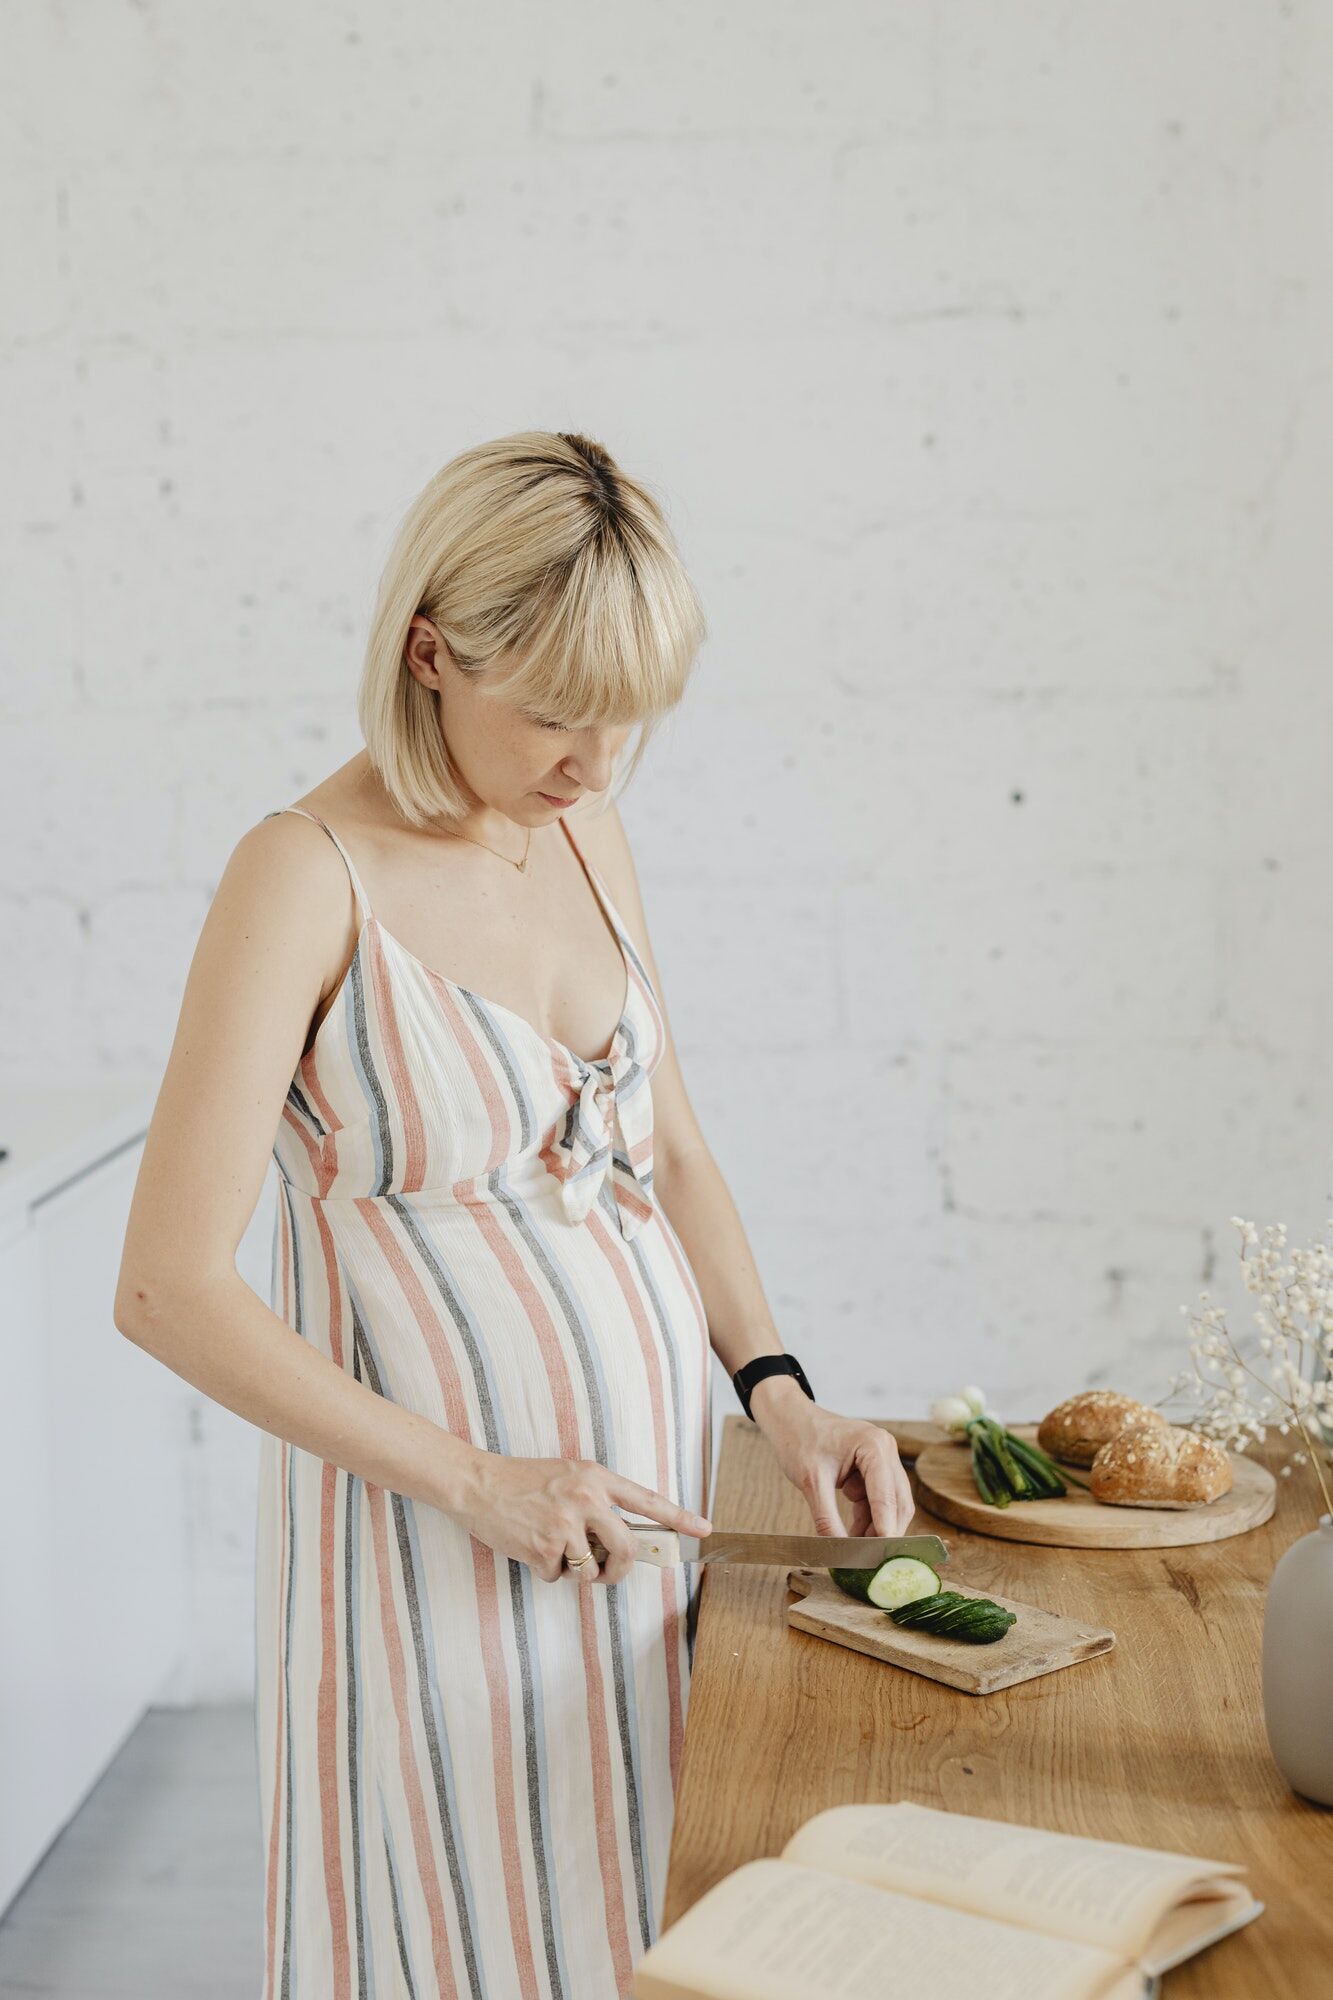 Pregnant woman cooking from a cookbook